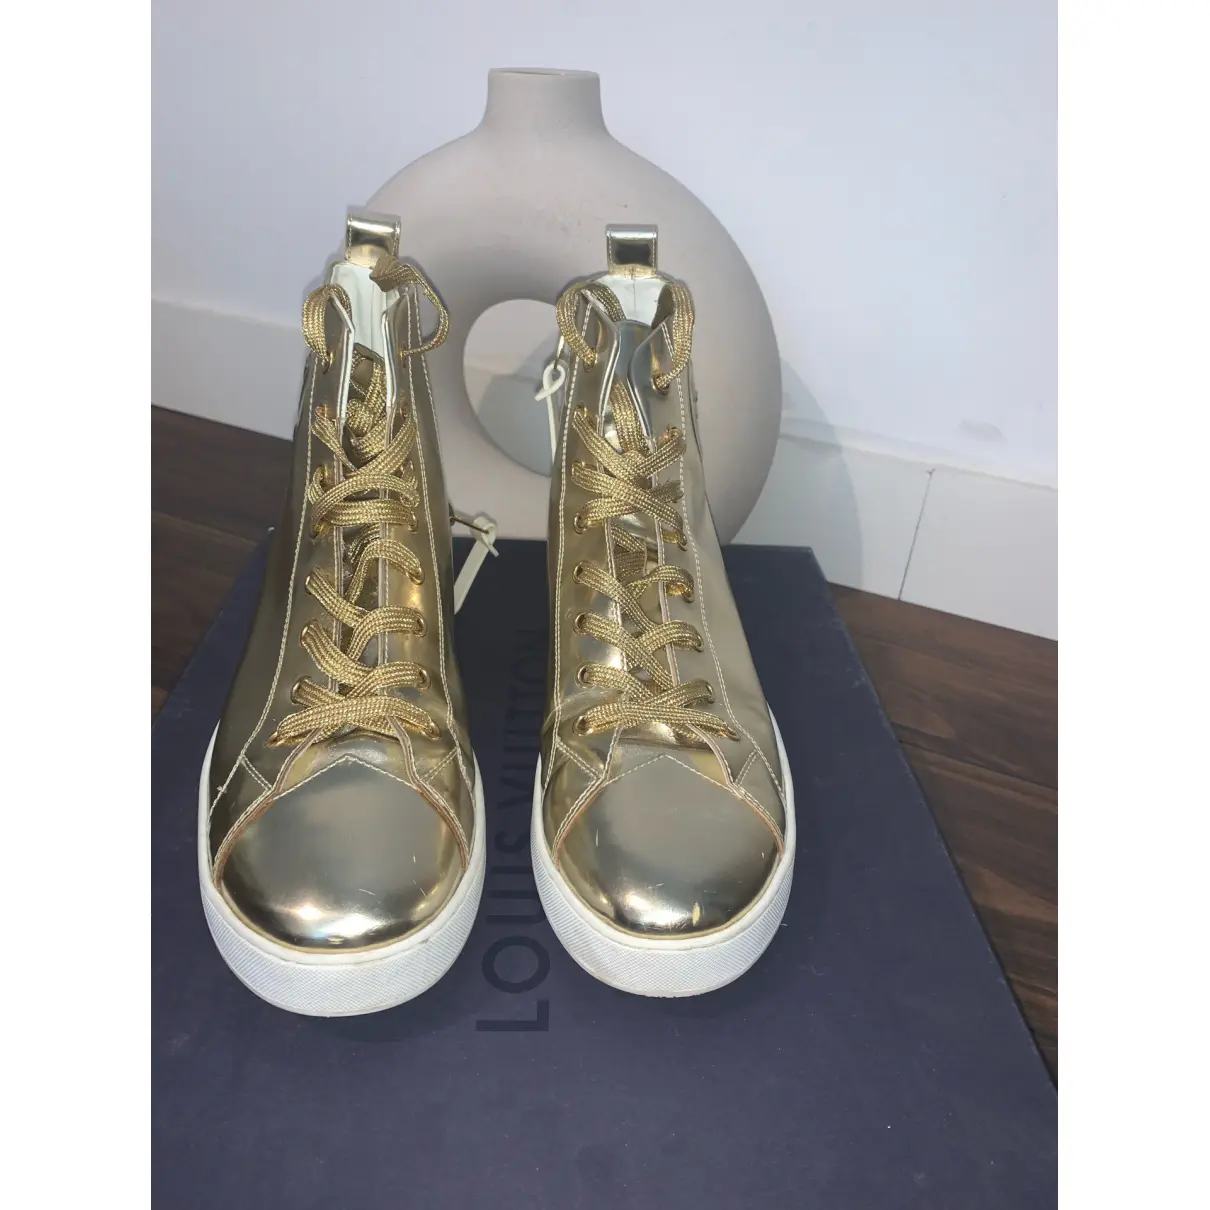 Buy Louis Vuitton Patent leather trainers online